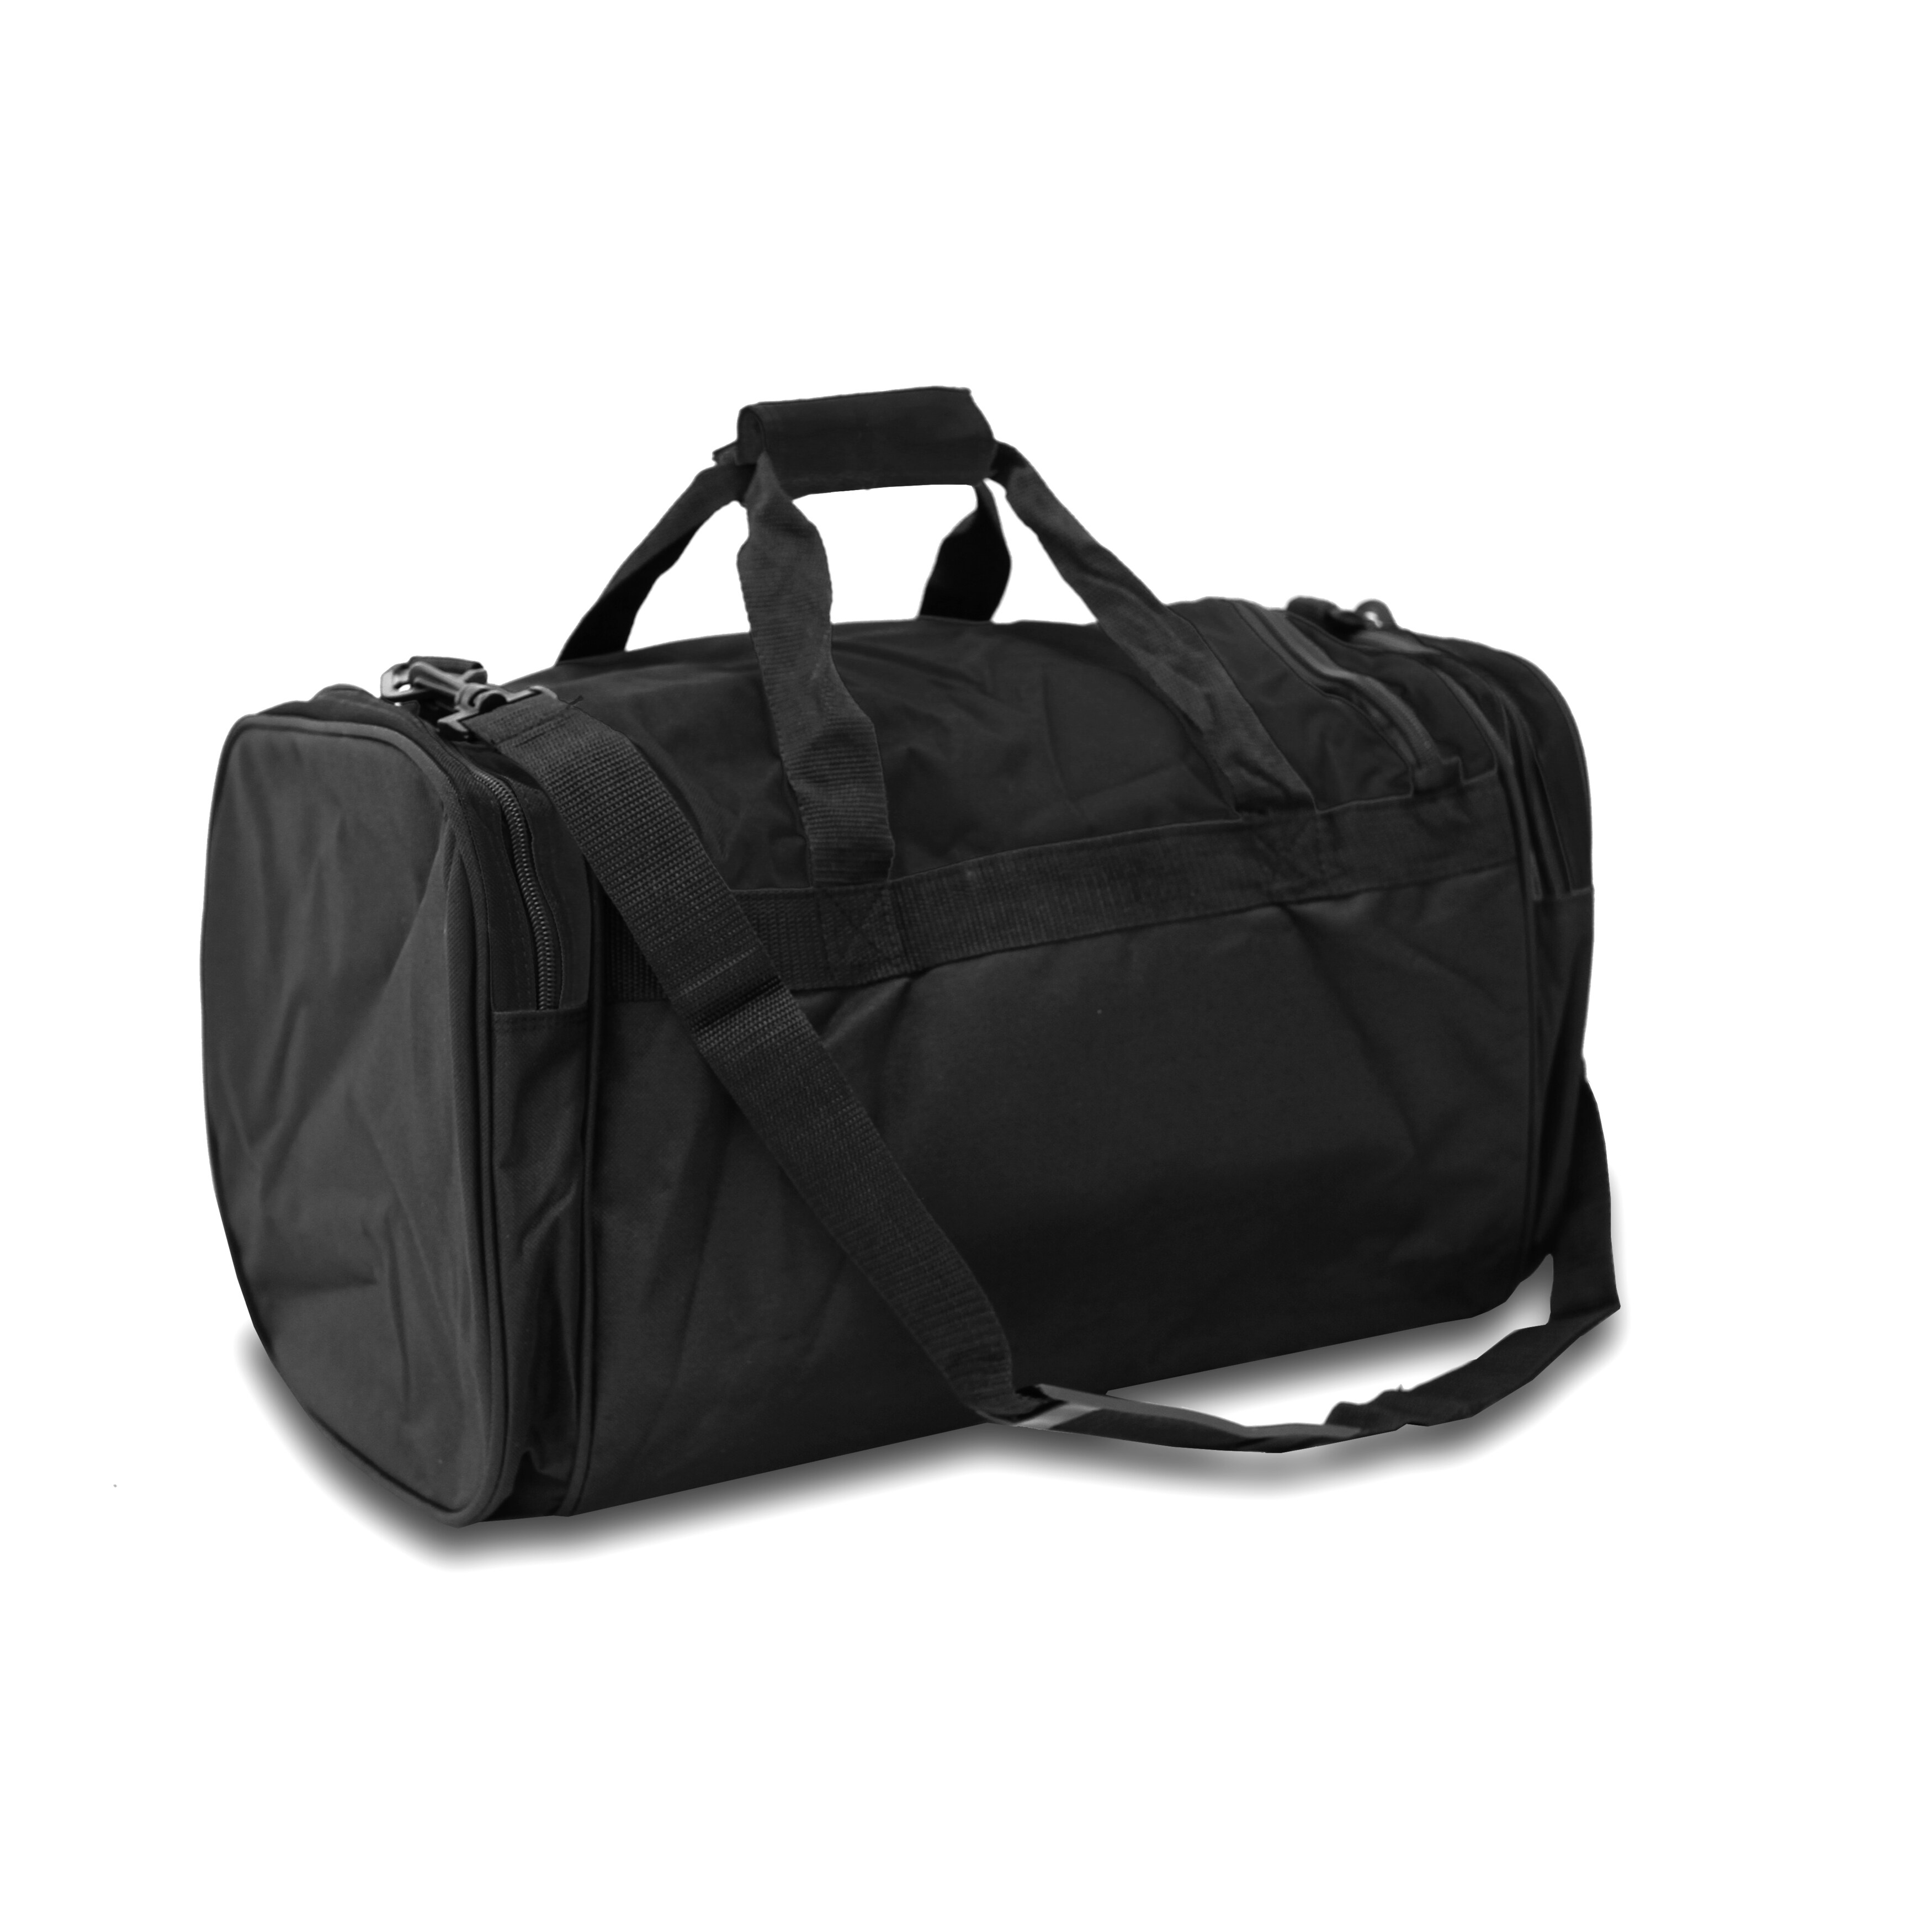 J World  'Copper' 18-inch Carry-on Duffel Bag - image 1 of 5